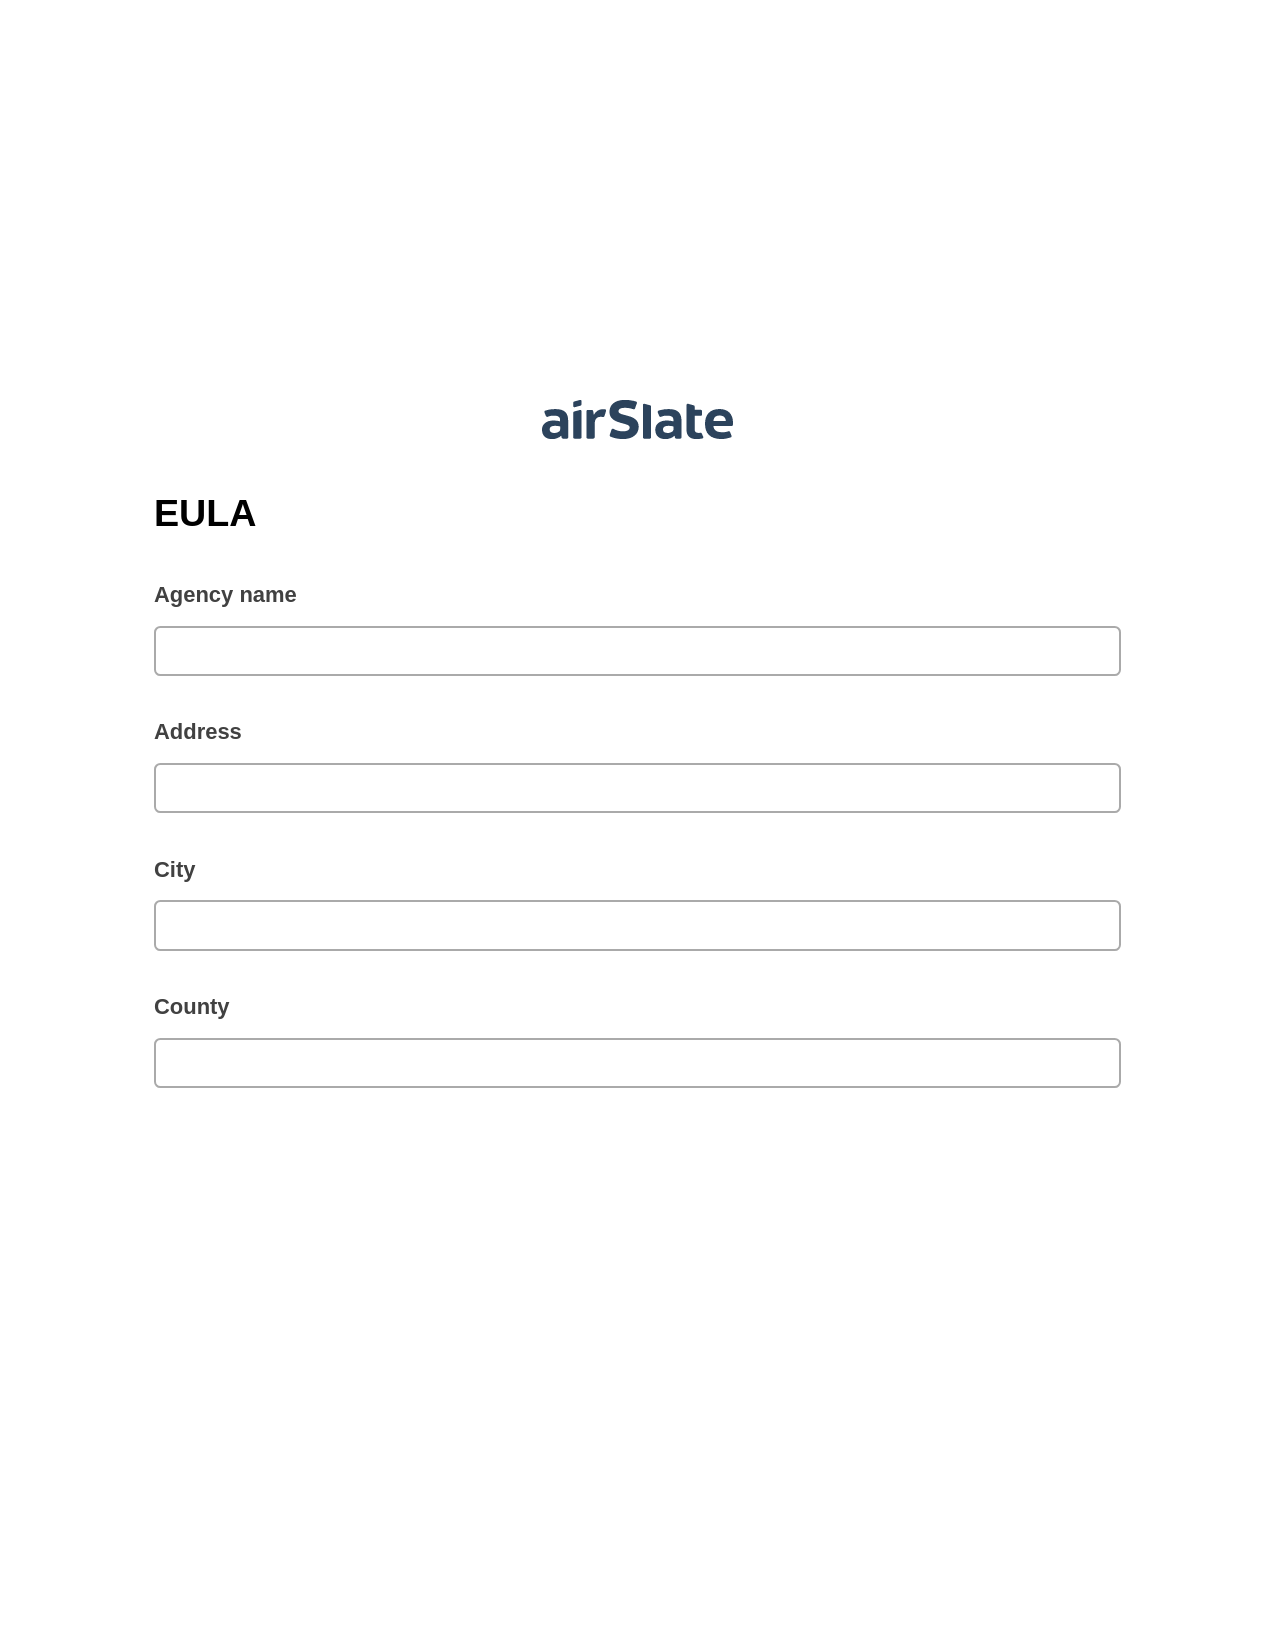 EULA Pre-fill from Salesforce Records with SOQL Bot, Webhook Bot, Dropbox Bot